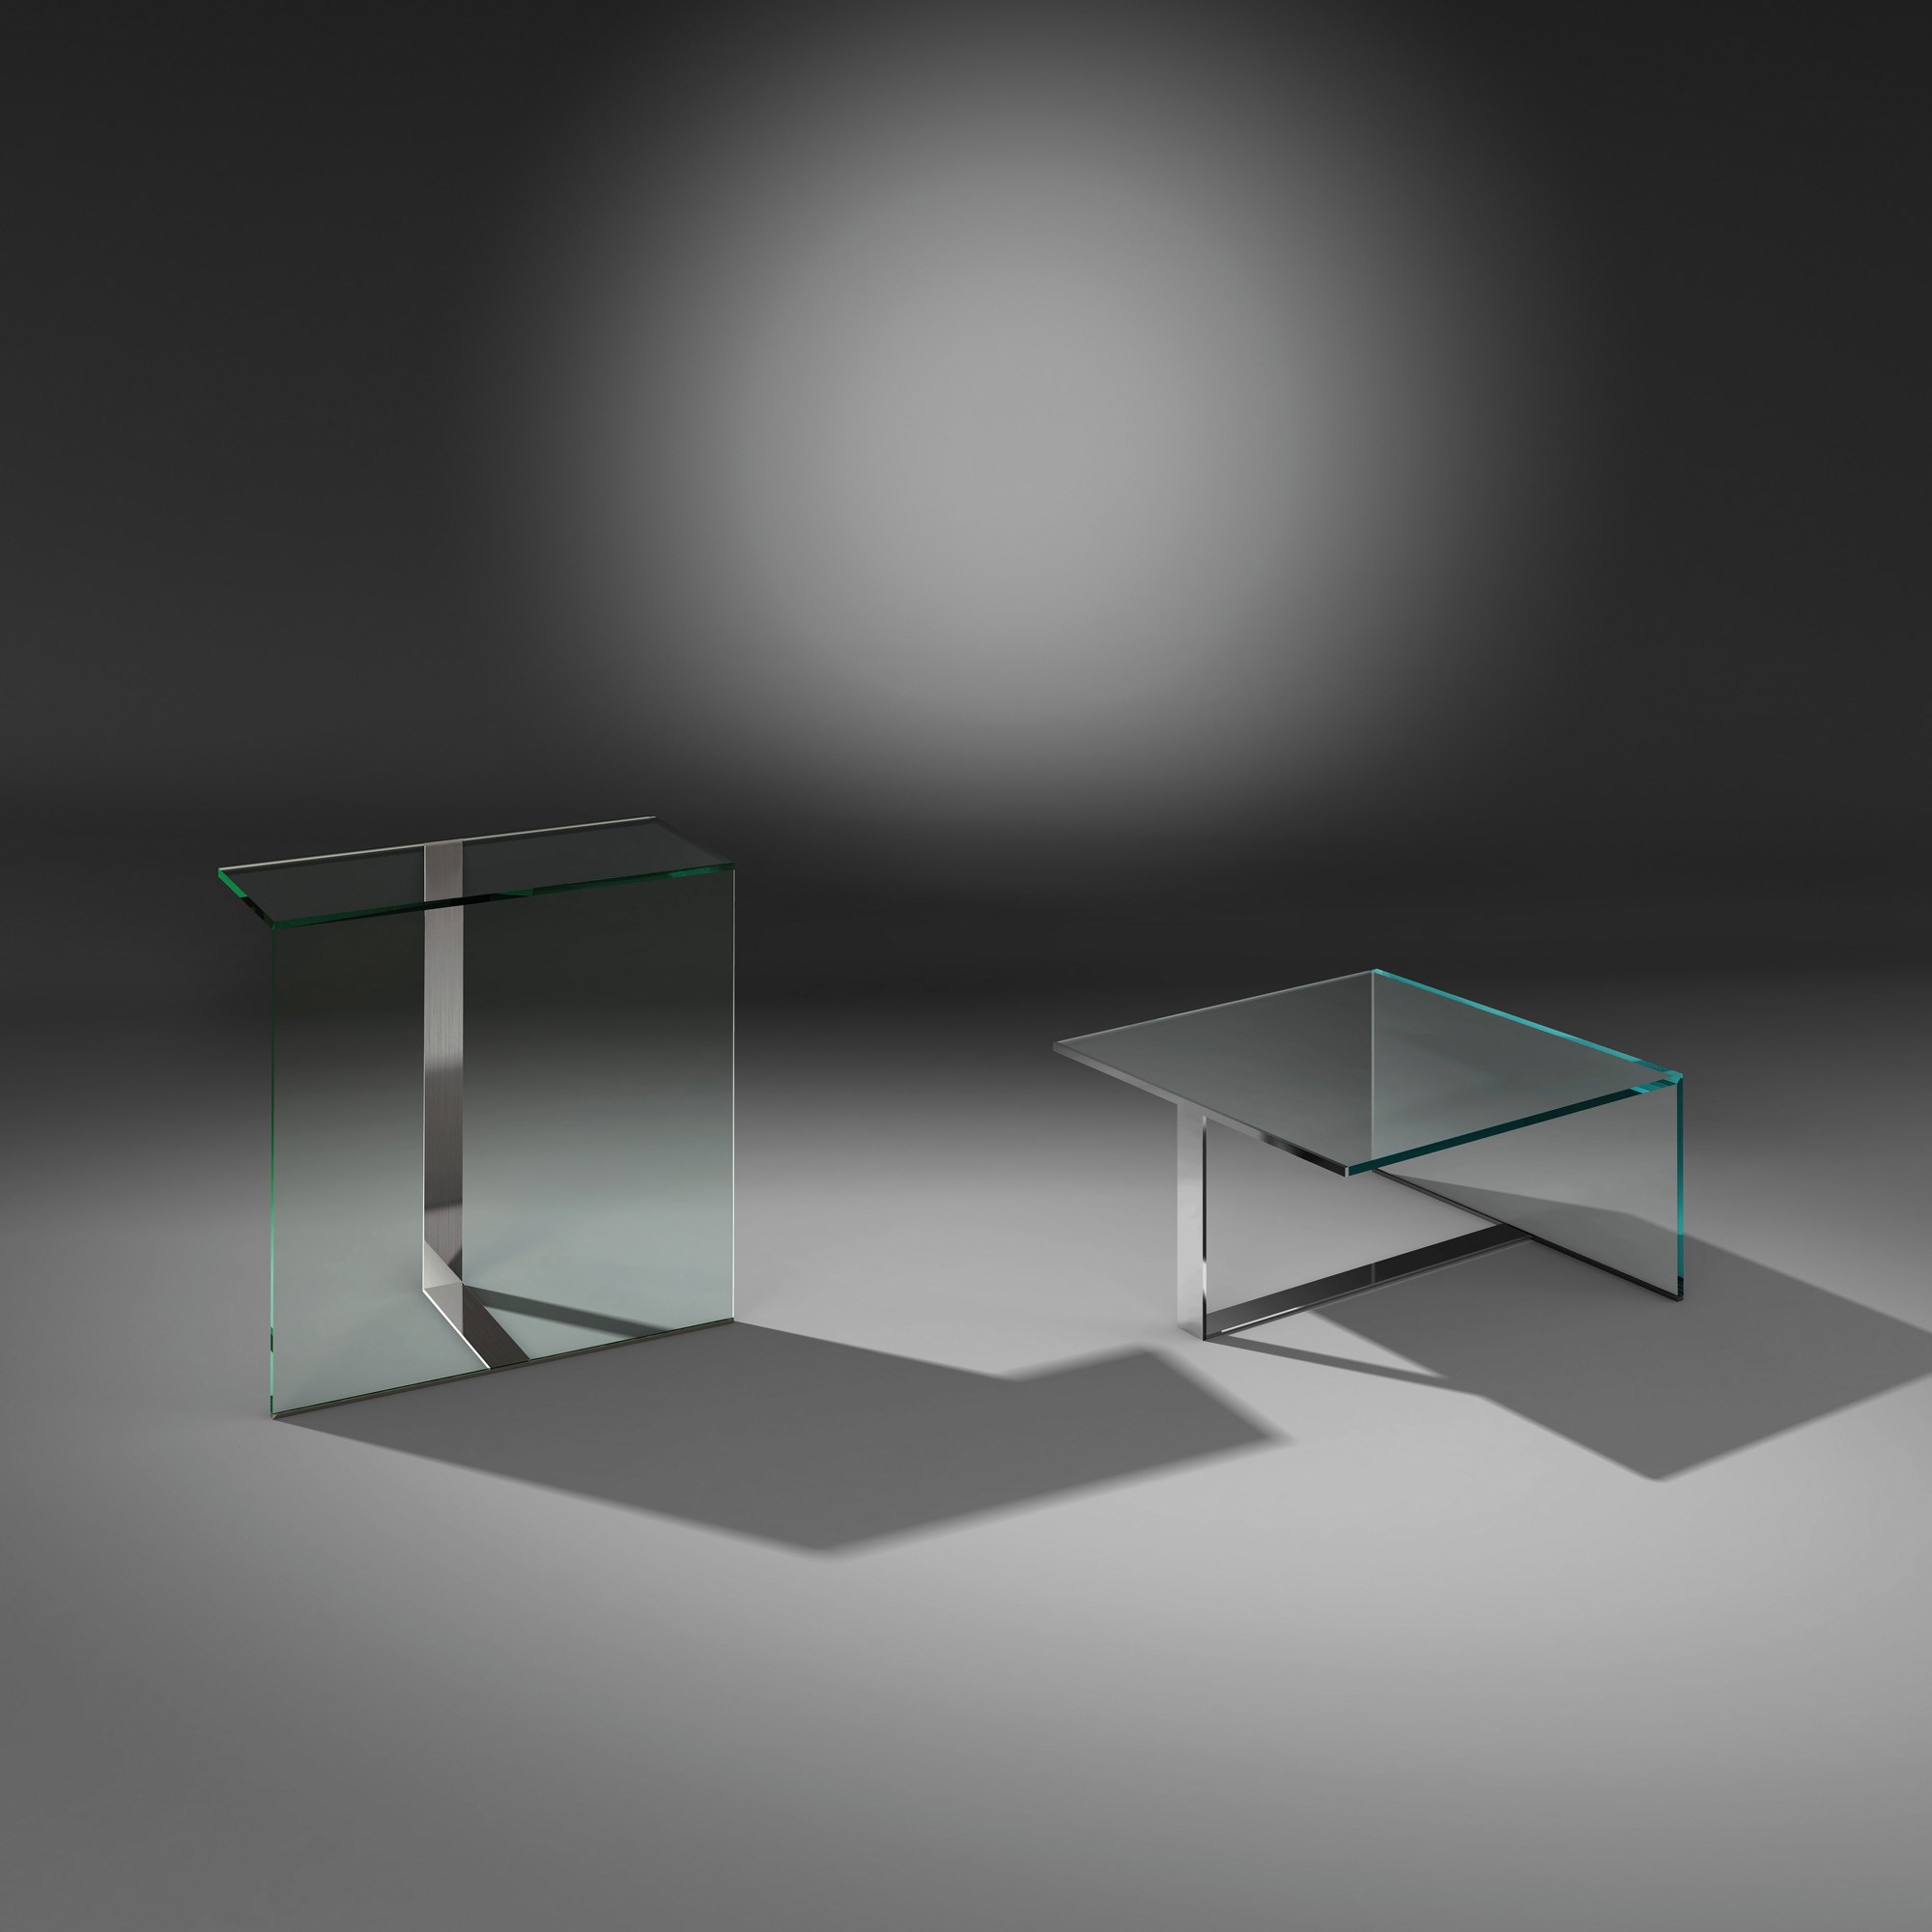 Glass coffee table DAVIS SOLO by DREIECK DESIGN: DAVIS SOLO 88 - Floatglass clear and Optiwhite clear - base stainless steel brushed